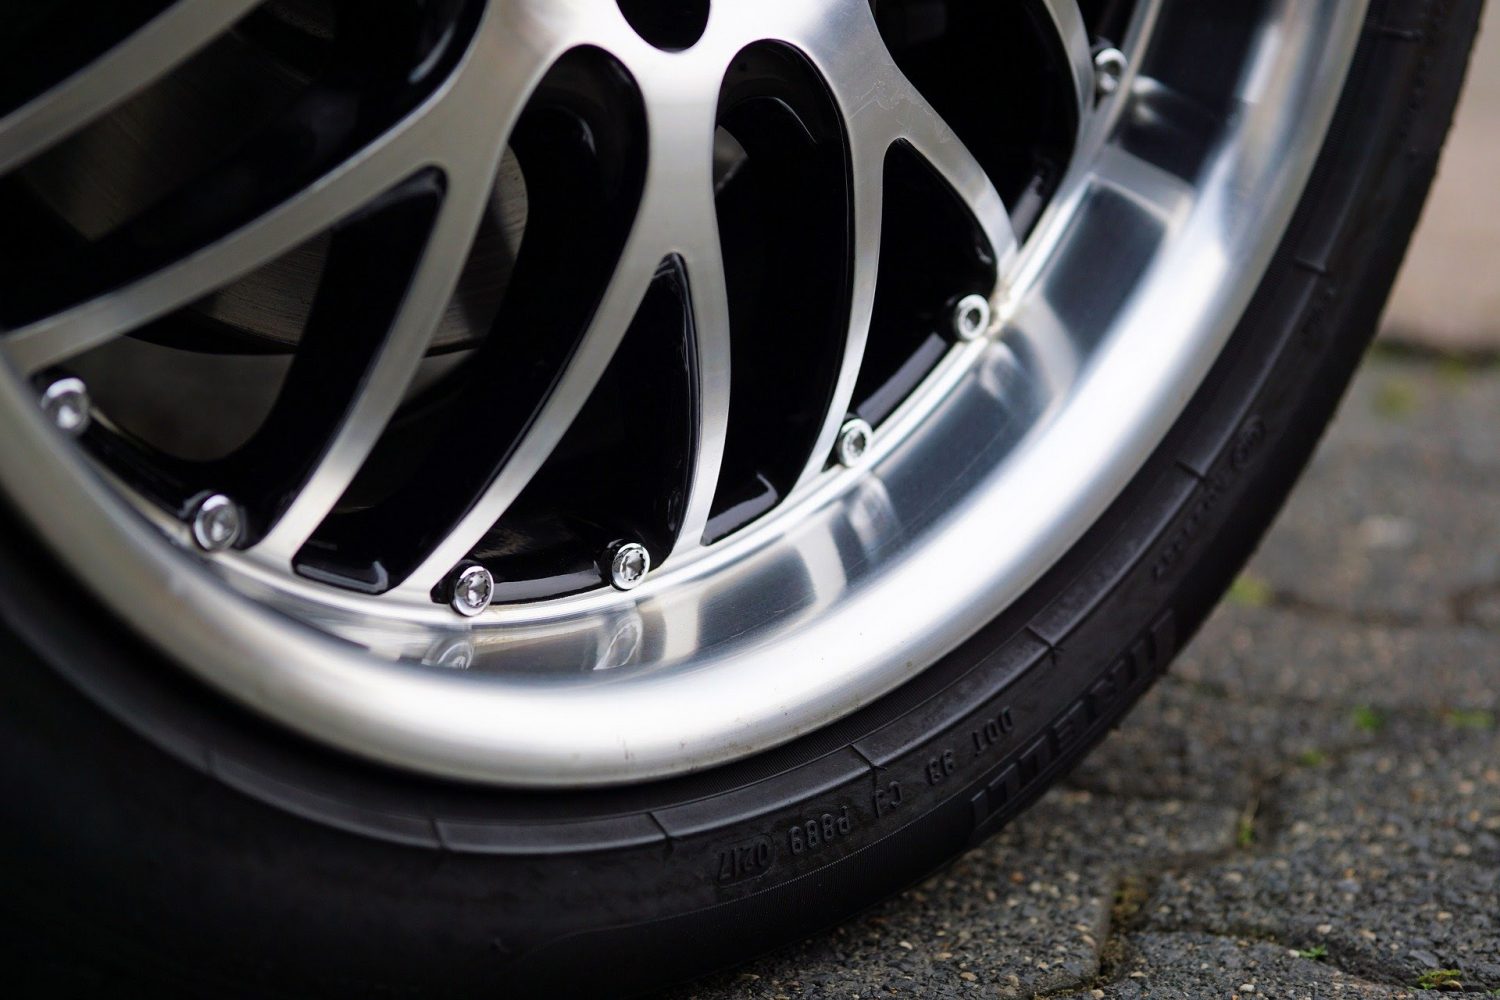 Top tips to protect your car’s alloy wheels